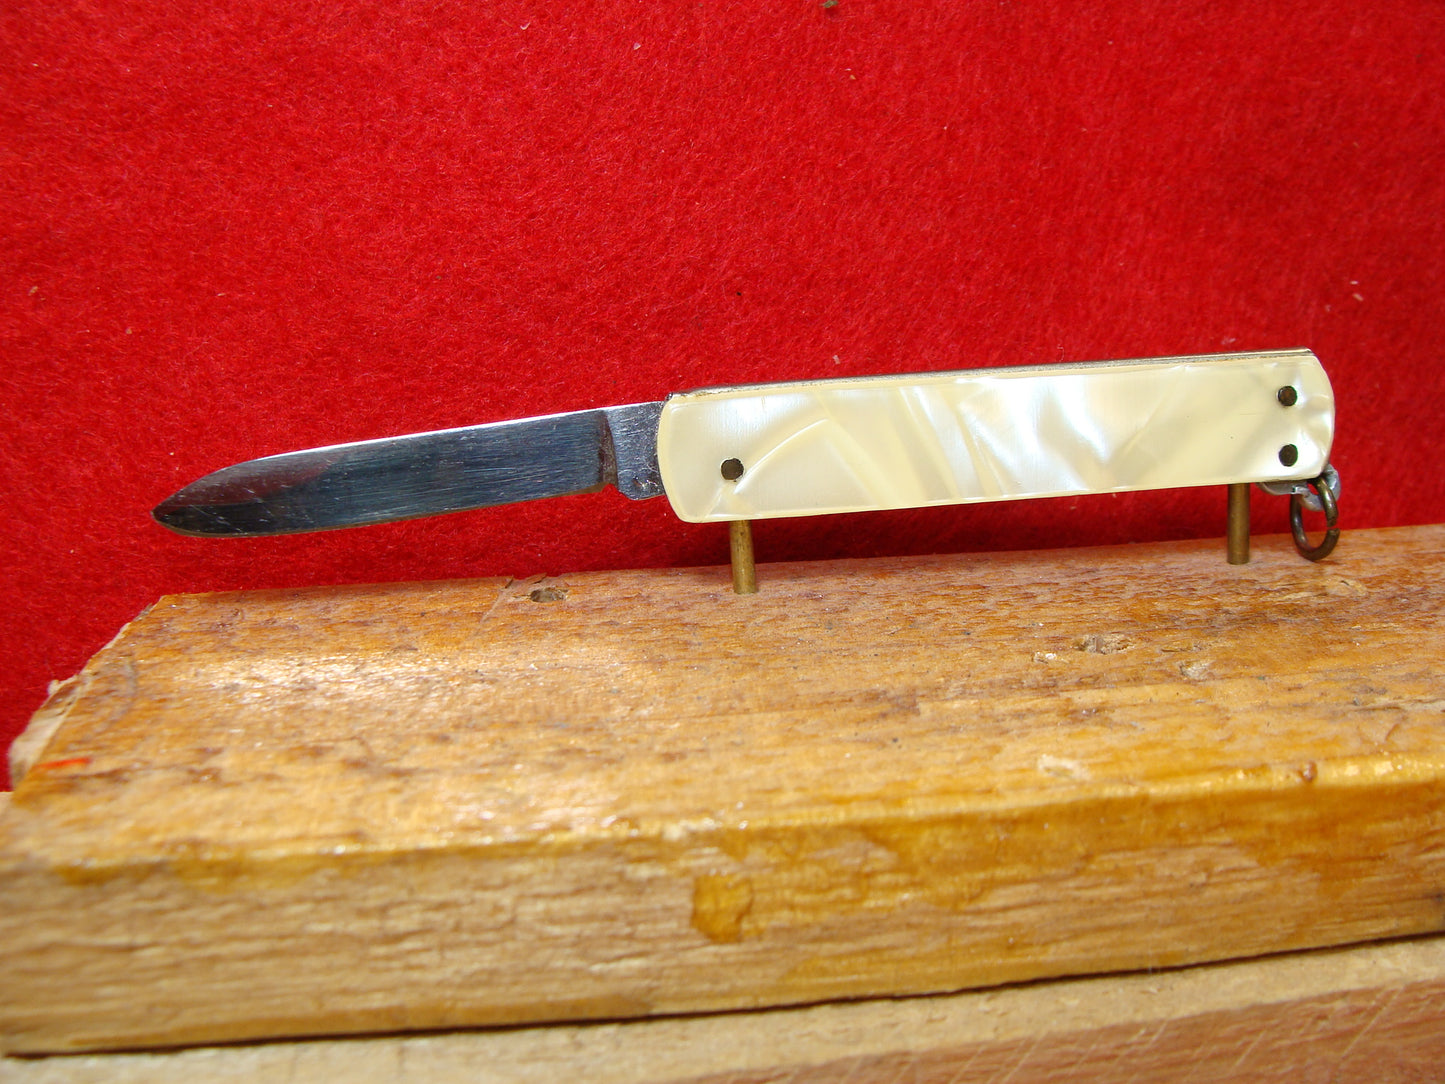 BREVETT UNMARKED ITALY 1950-58 PULL TAB ITALIAN AUTOMATIC KNIFE CRACKED ICE CELLULOID HANDLES-ETCH: SORRENTO.